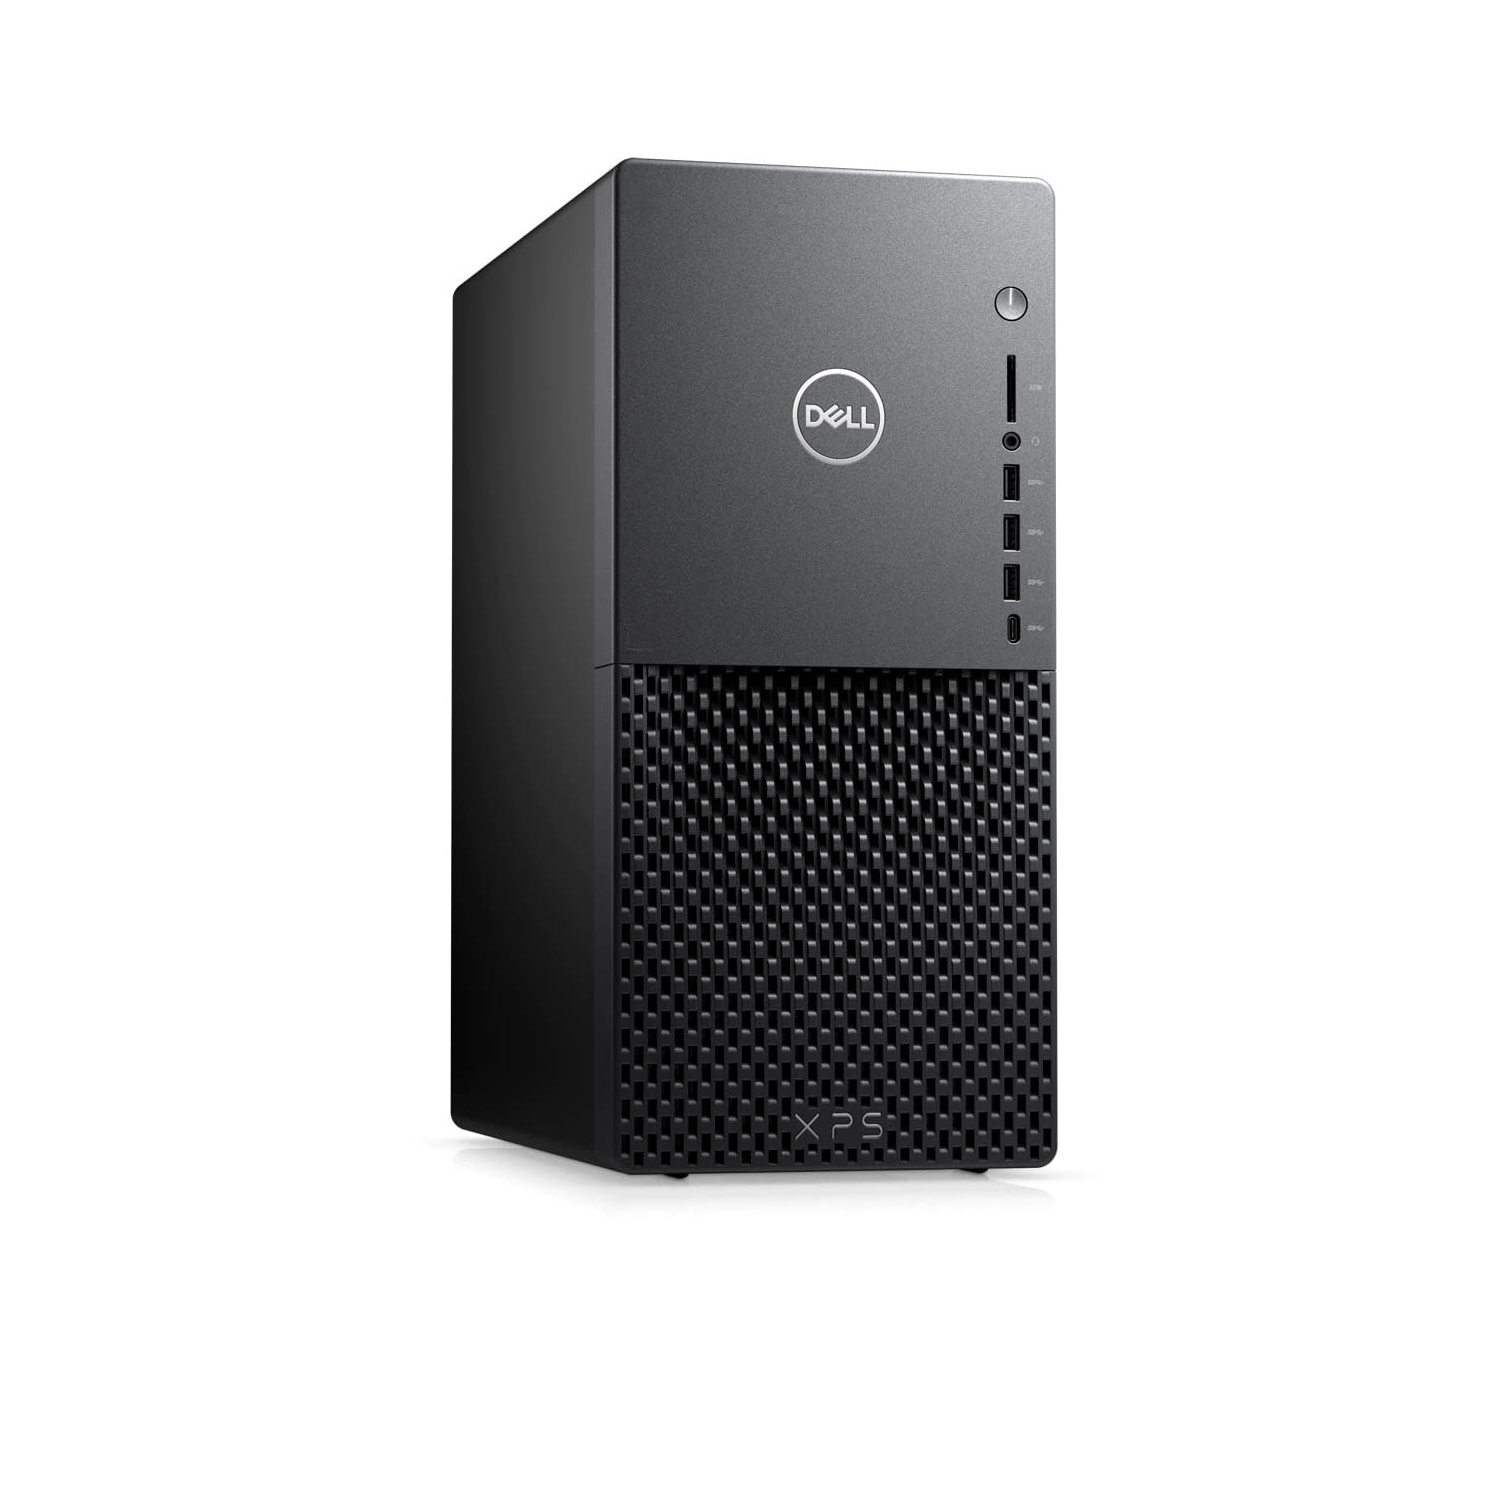 Refurbished (Excellent) - Dell XPS 8940 Desktop (2020) | Core i5 - 1TB HDD - 8GB RAM - RX 5700 | 6 Cores @ 4.4 GHz - 11th Gen CPU Certified Refurbished